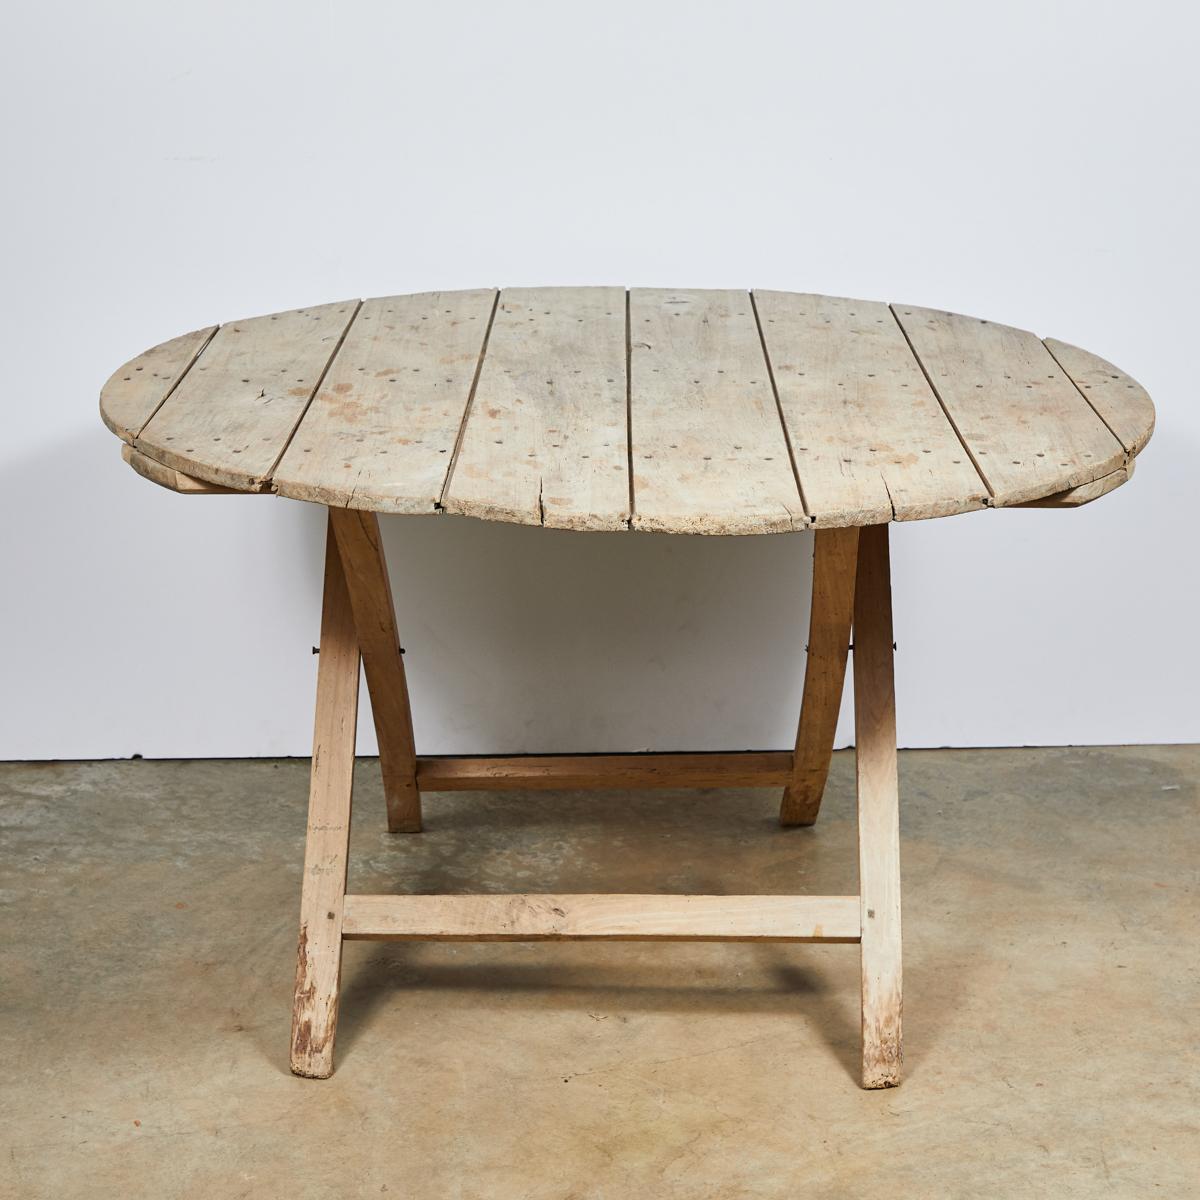 Late 19th-century table from the Champagne region of France. A beautiful light colored oak, this unfussy piece has a rustic patina, and would be lovely for both indoor and outdoor use.  

France, circa 1880

Dimensions: 49W x 49D x 29.5H